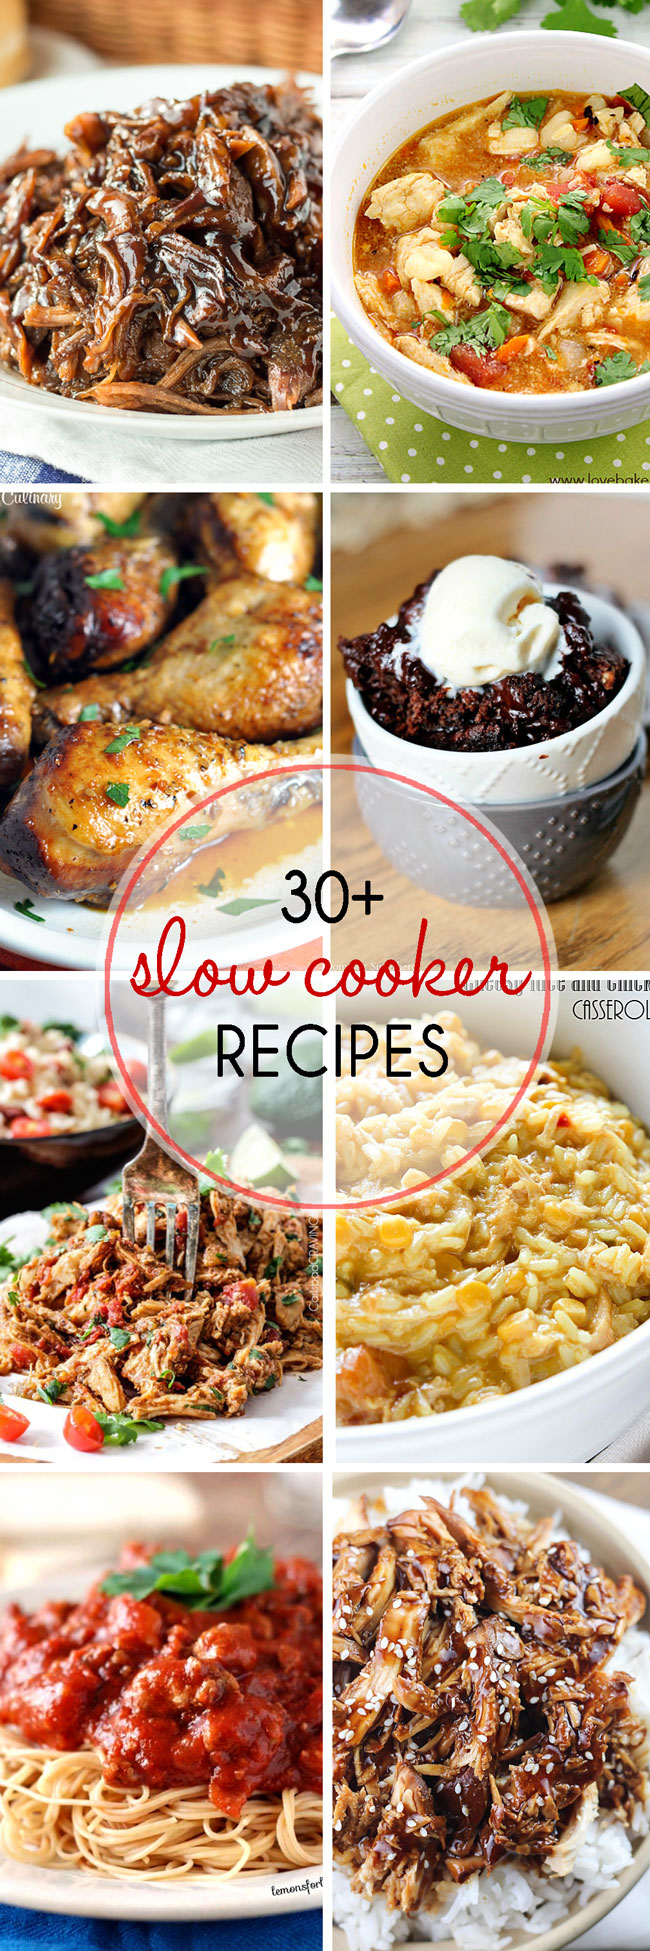 Love a flavorful dinner without all the work? Then you'll adore these 30+ Slow Cooker Recipes for Your Crock Pot! We've rounded up everything from dinner to dessert to give a meal to remember without all the fuss!